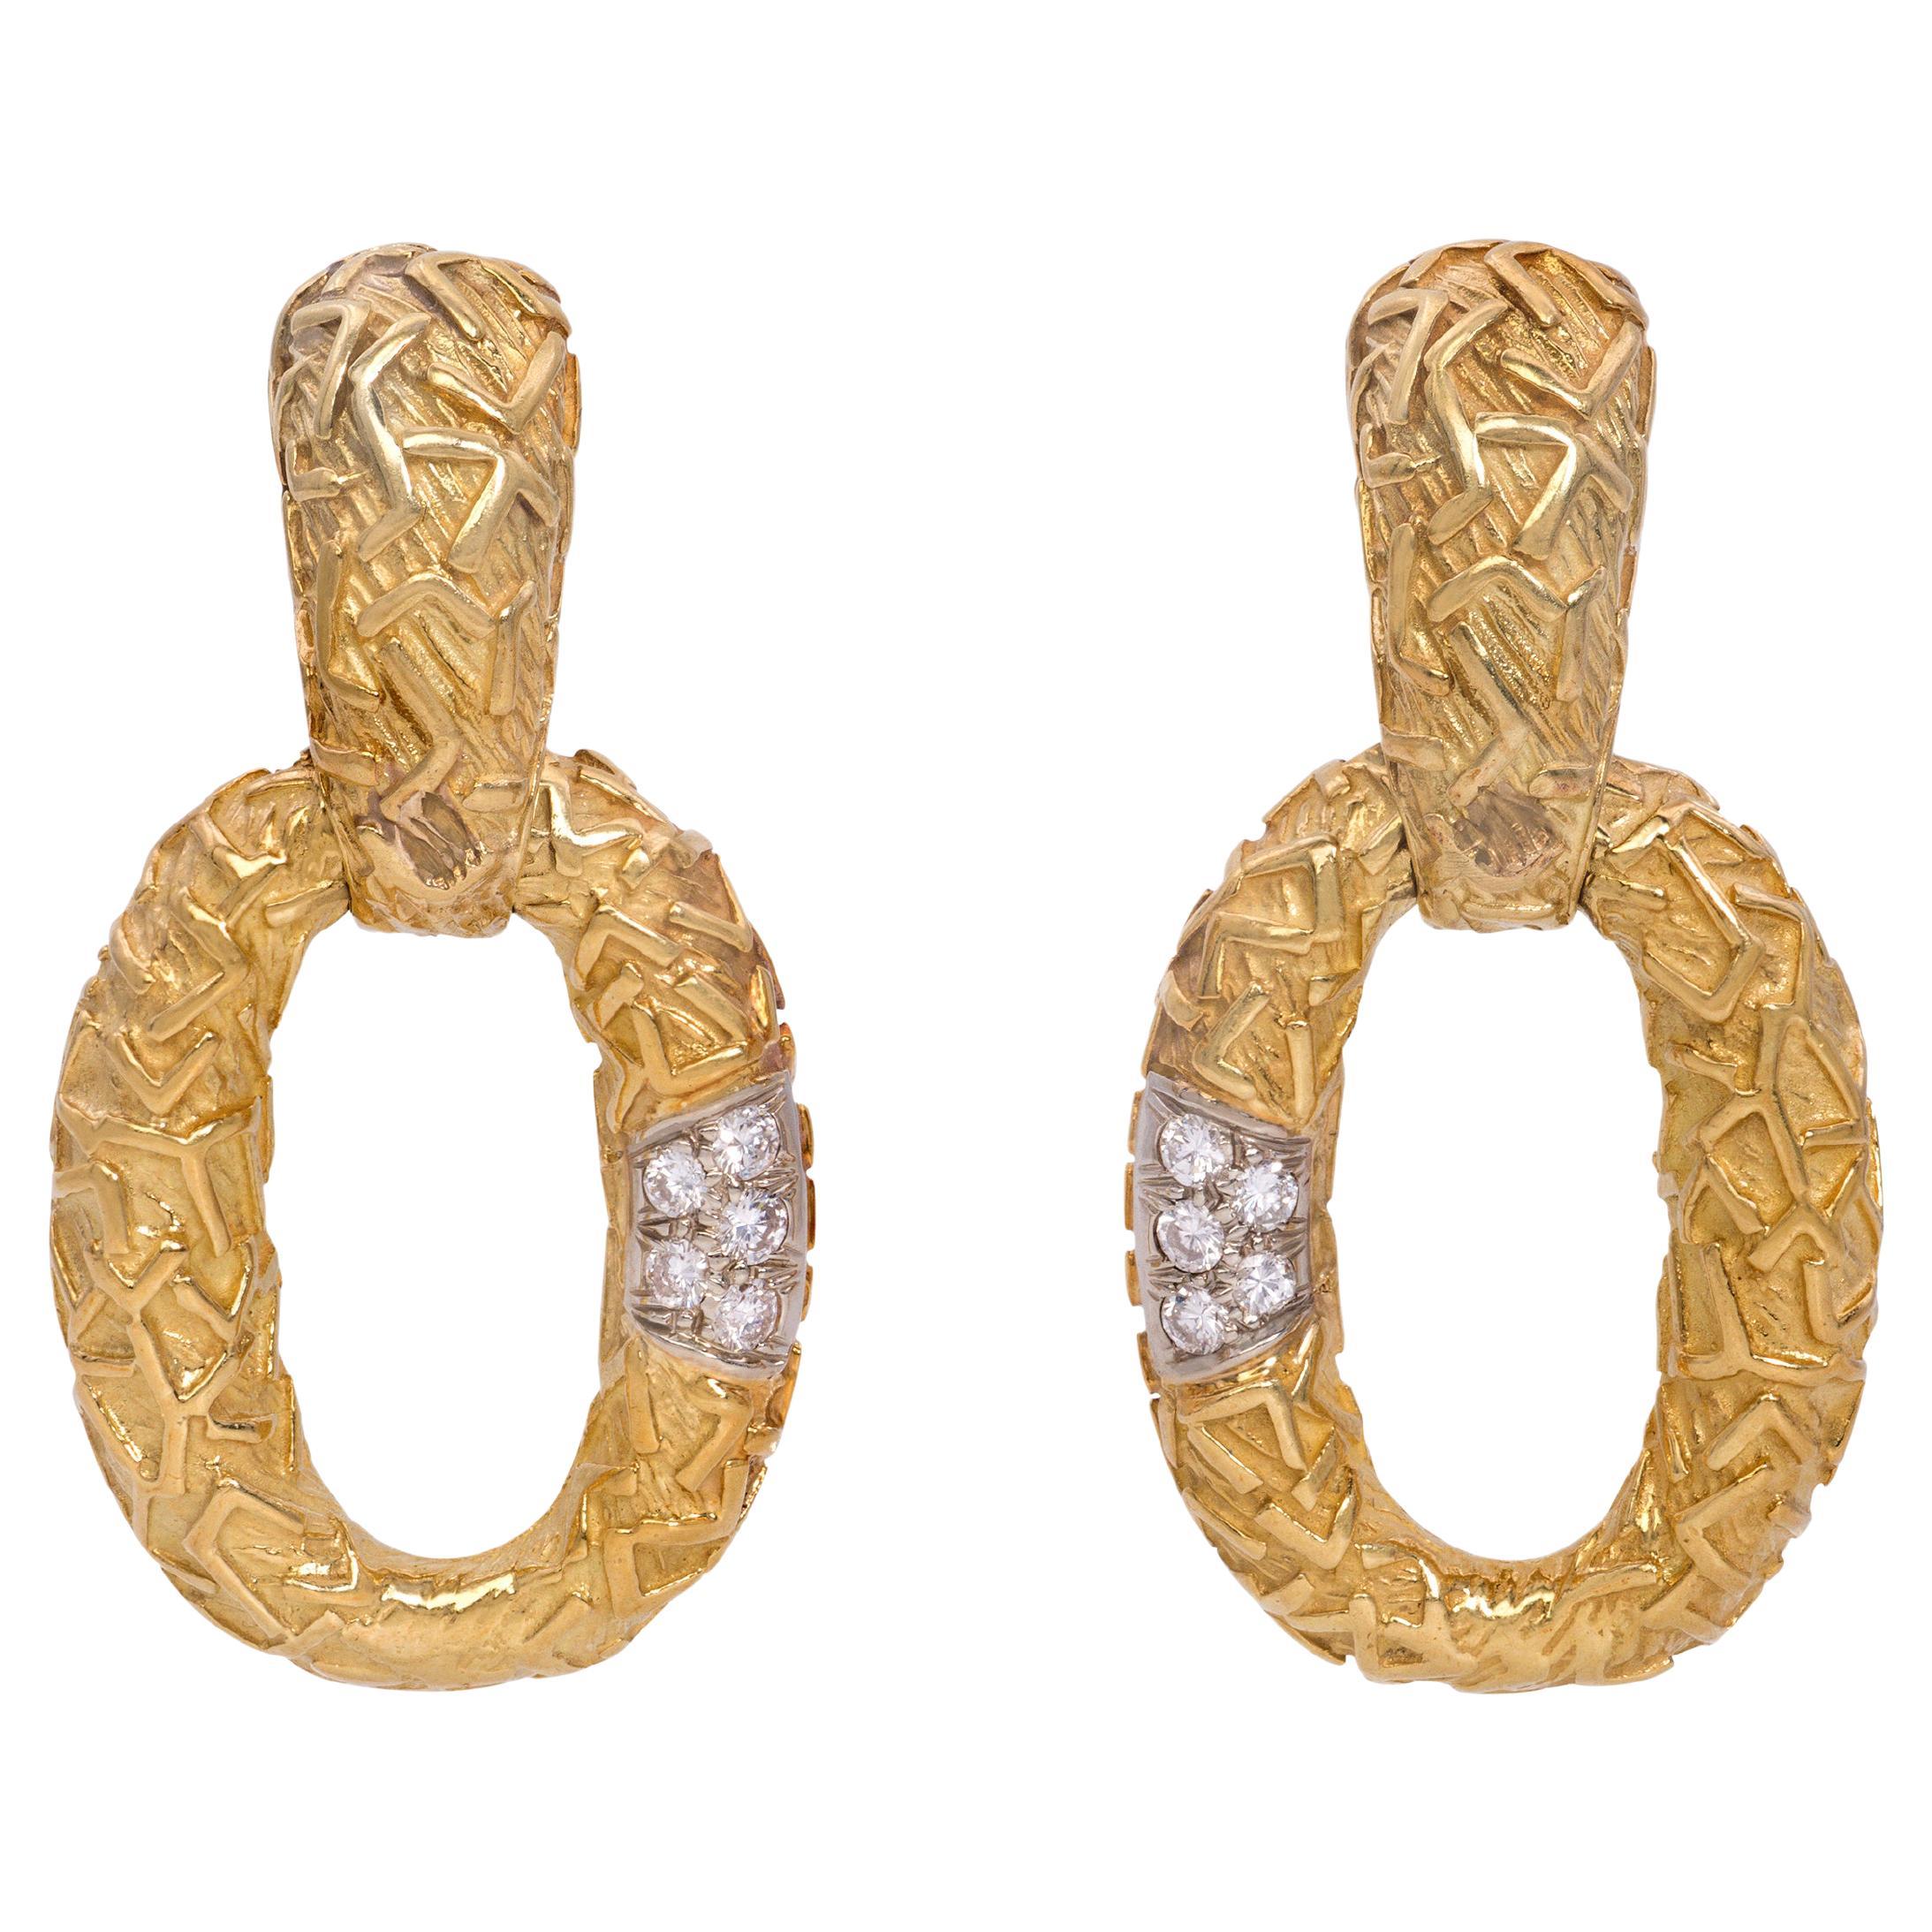 c. 1970 R. Stone Diamond and Gold Earrings